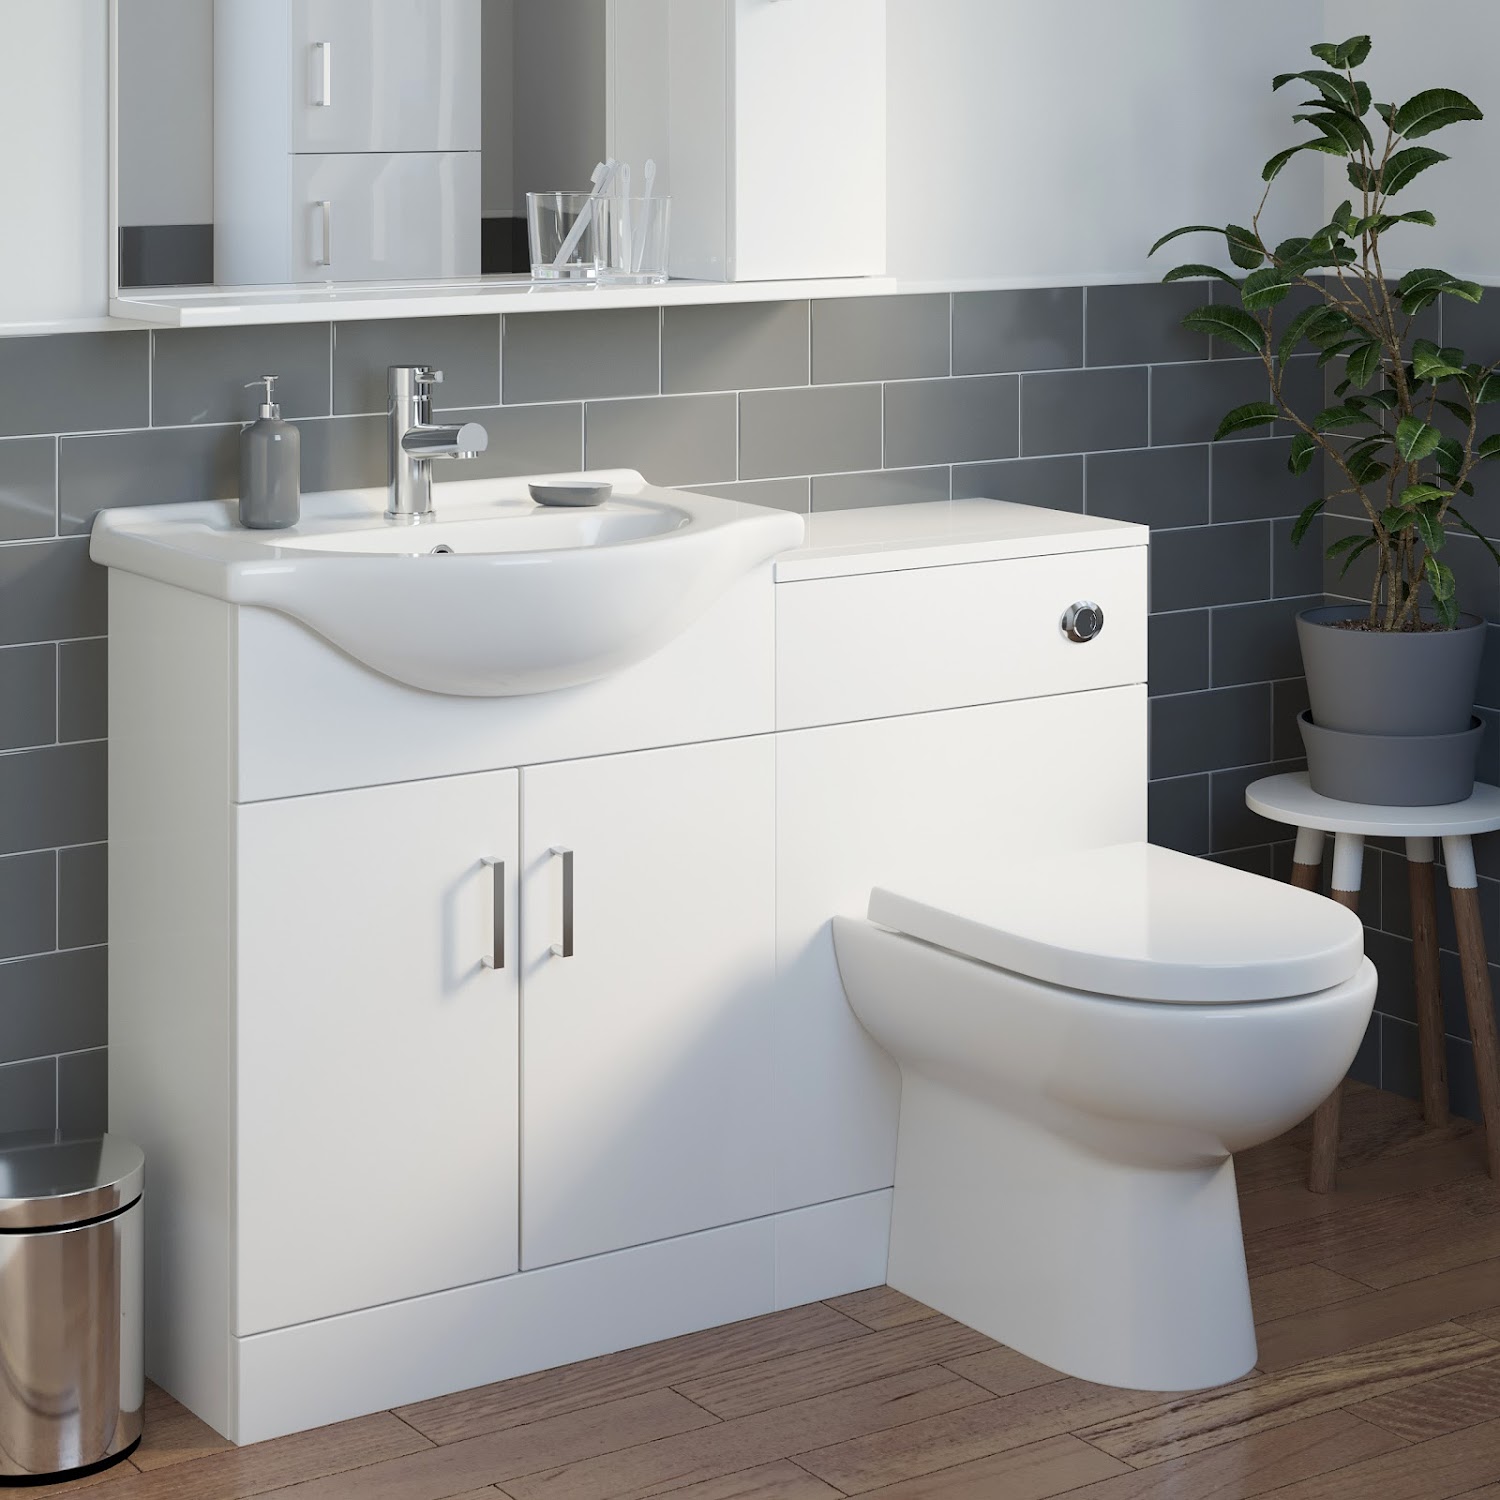 1150mm Toilet and Bathroom Vanity Unit Combined Basin Sink Furniture